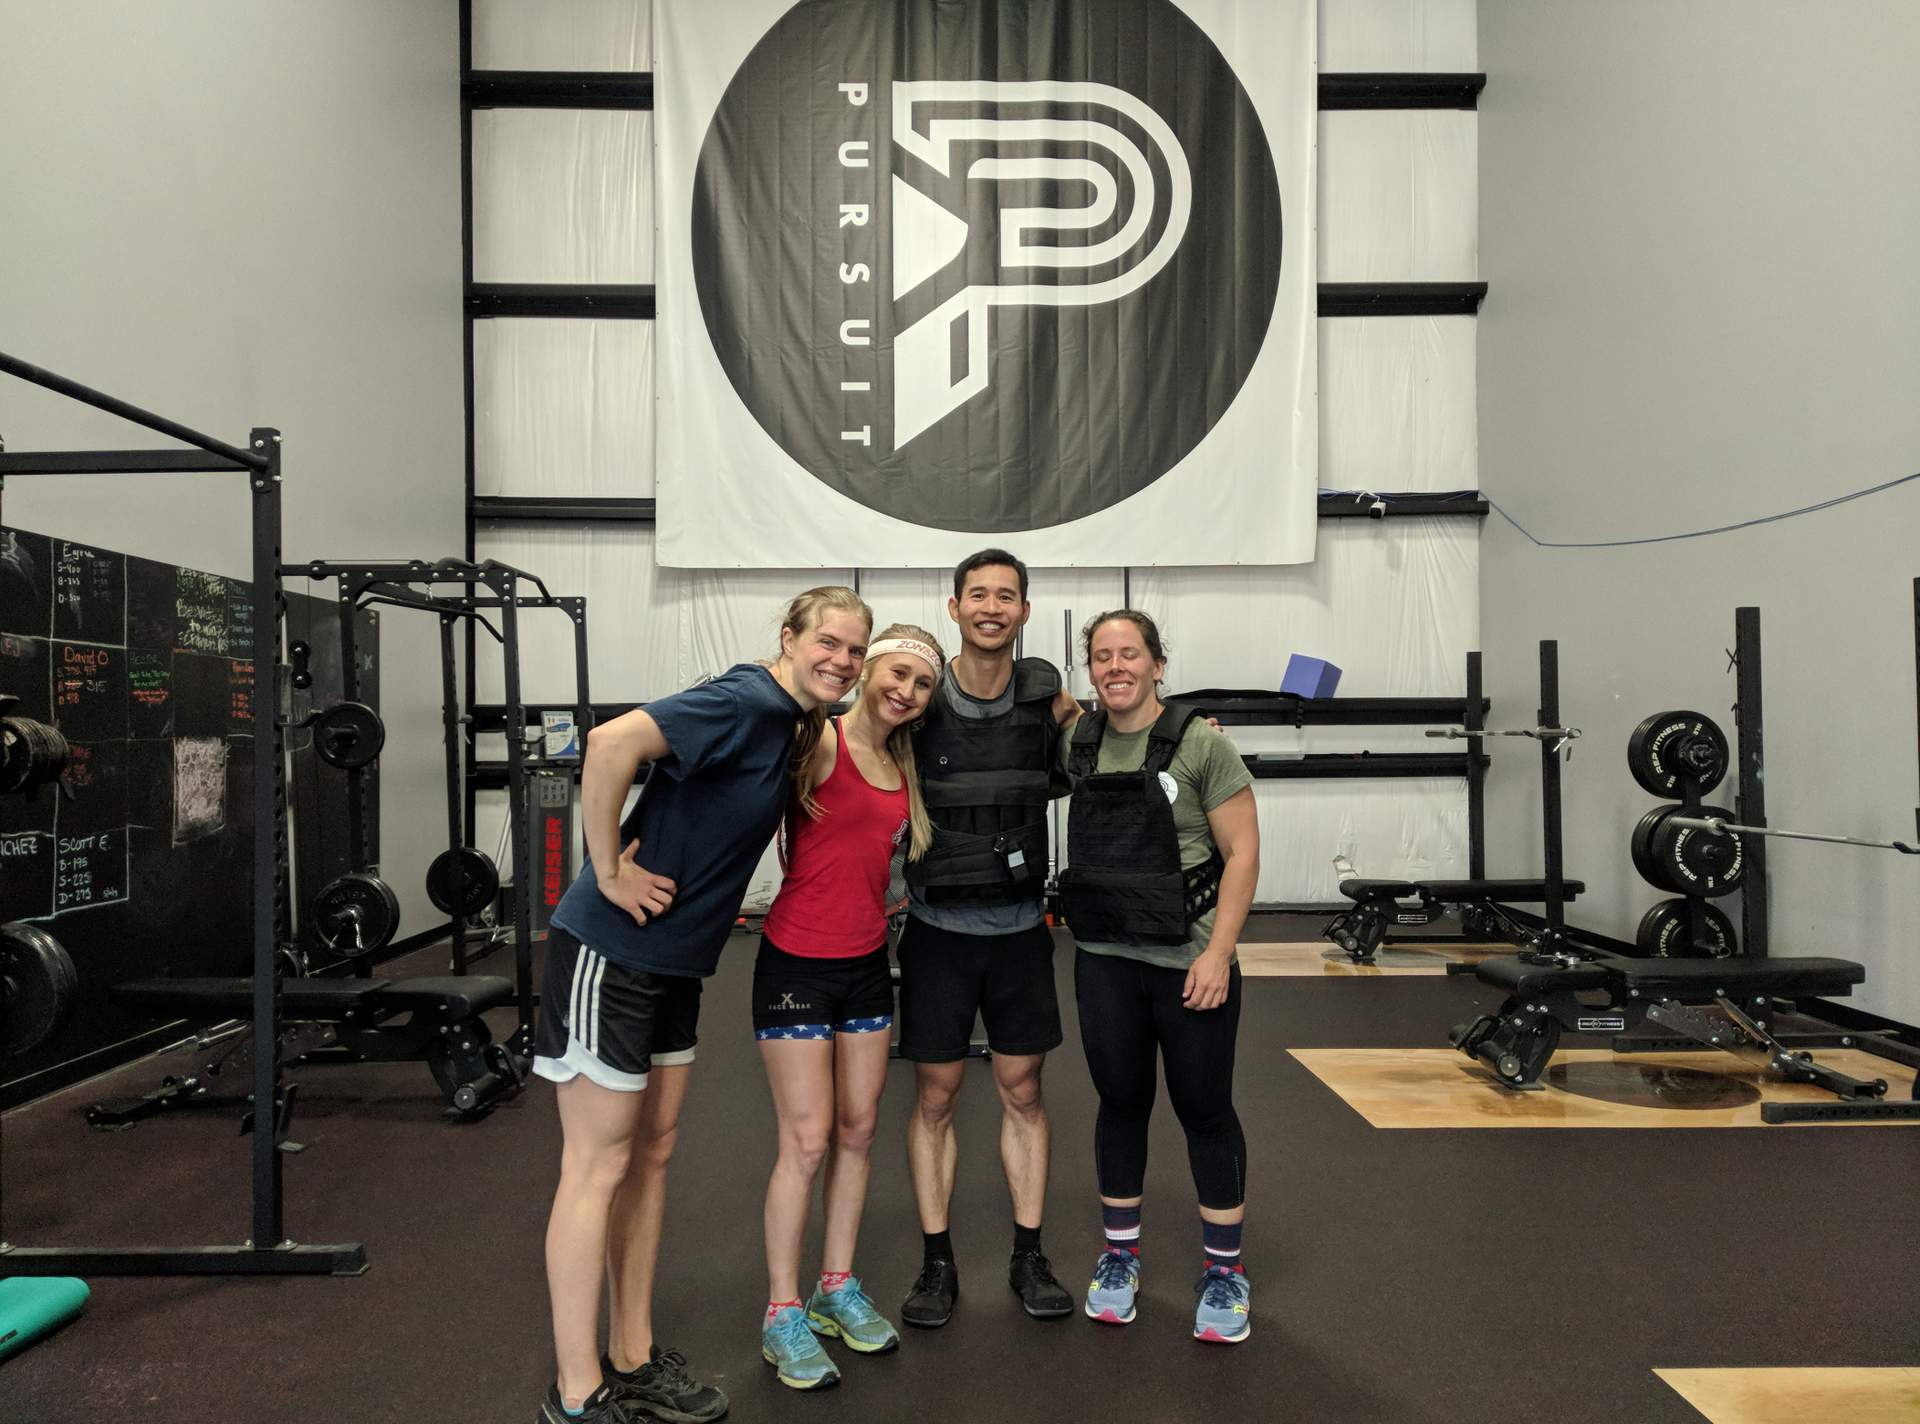 Evelyn, Emily, Felix, and Jennifer at Pursuit Nutrition & Fitness for the Murph Challenge.